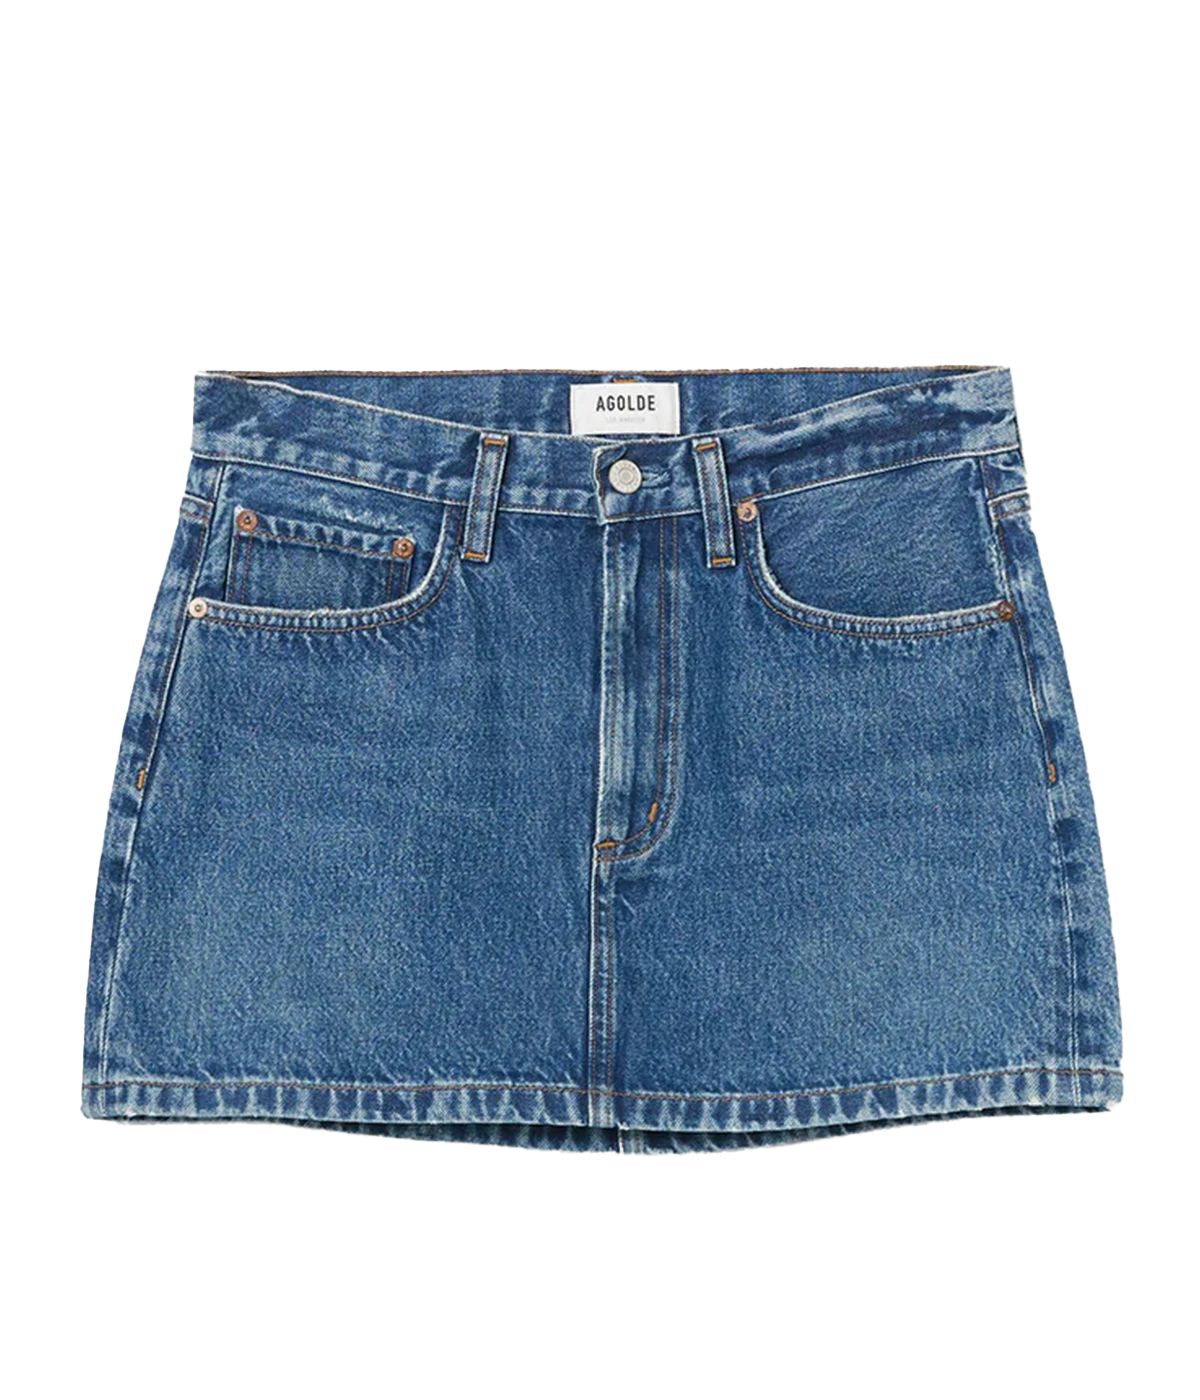 A classic medium wash mini skirt made from rigid denim, featuring a zip and button closure, 5 pocket detail, clean hem and low waist style. Summer staple, everyday basic, date night skirt, made in USA. 